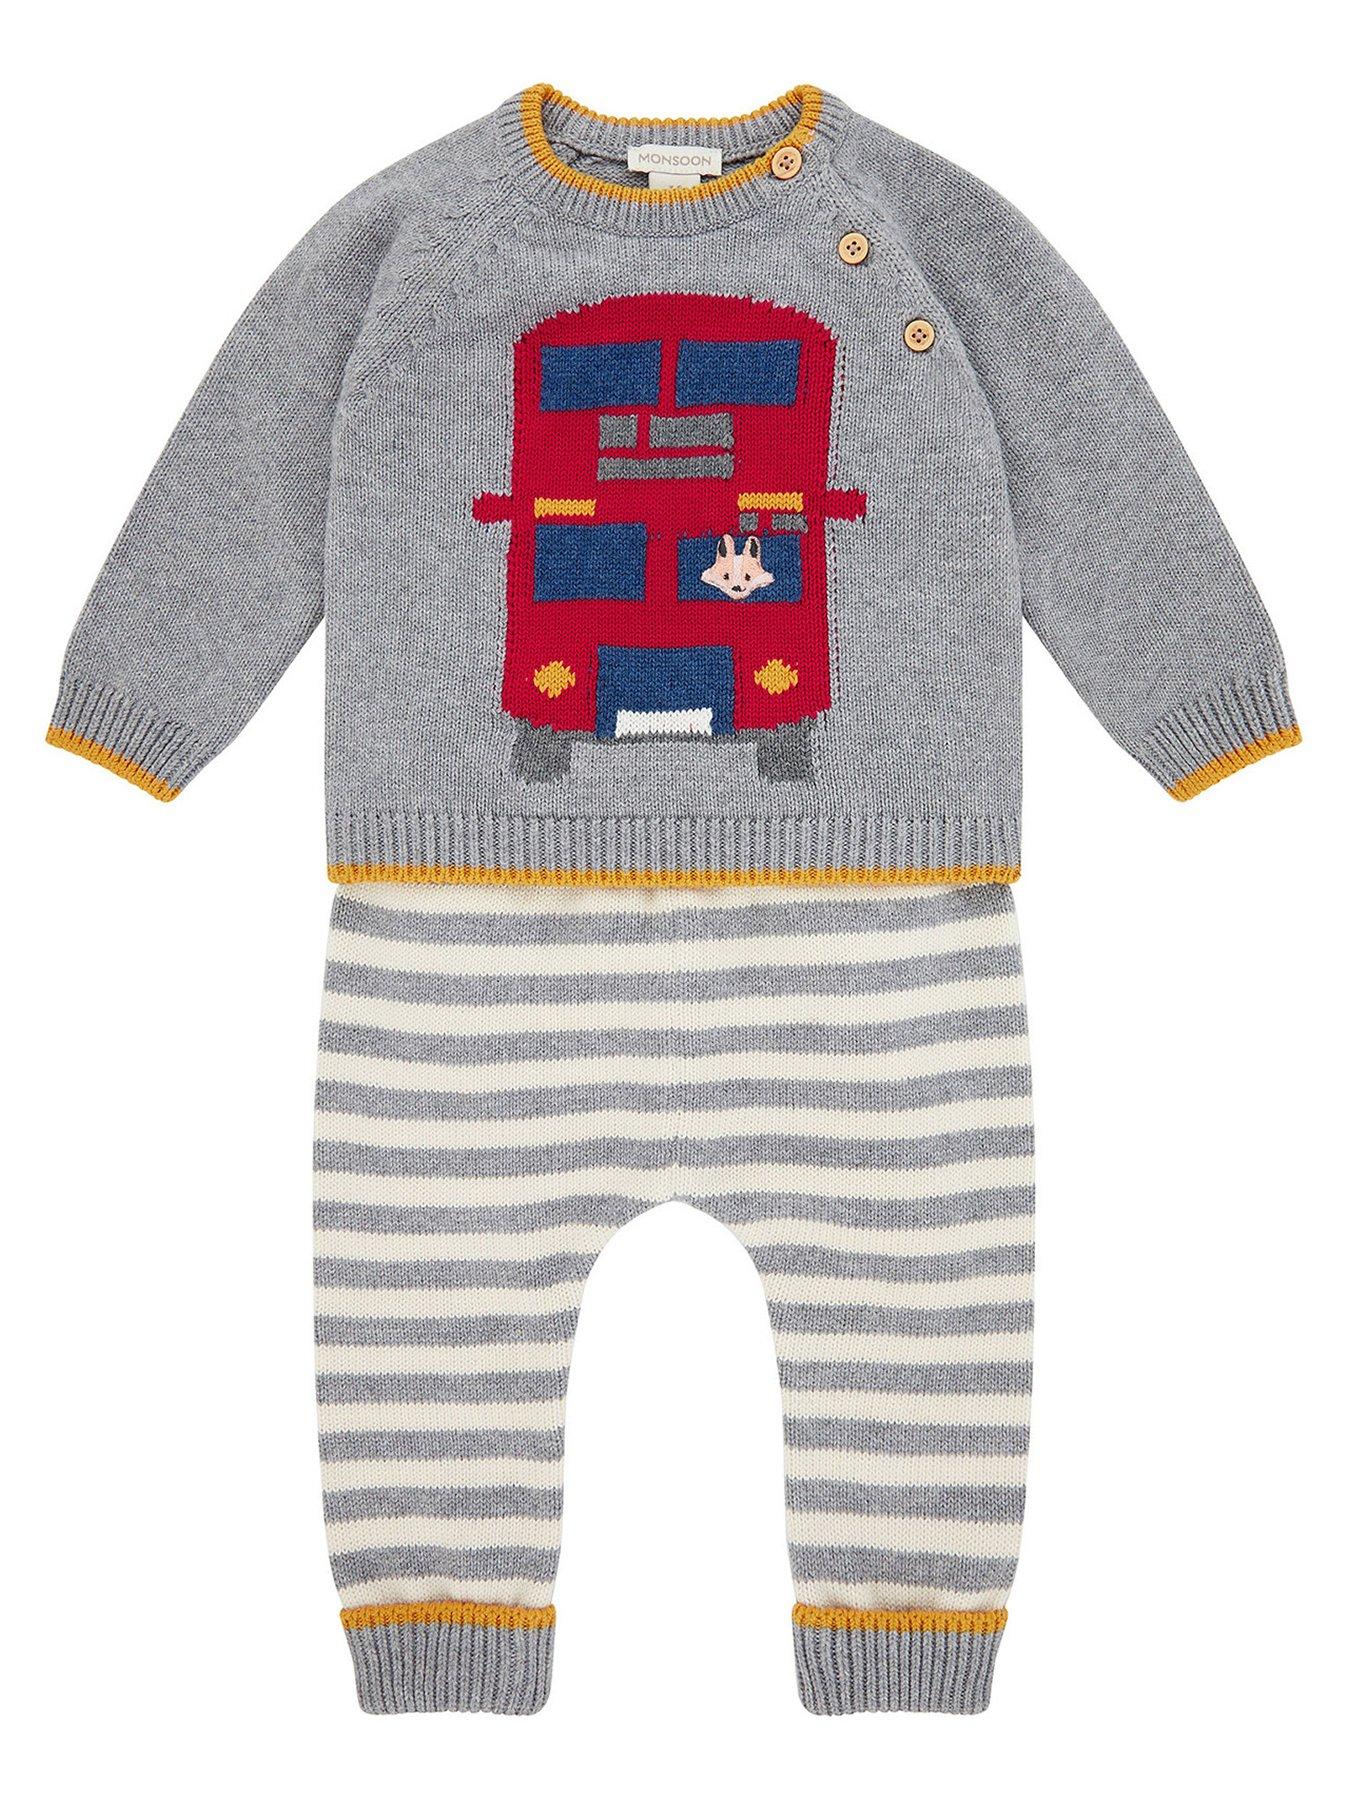 monsoon baby boy clothes